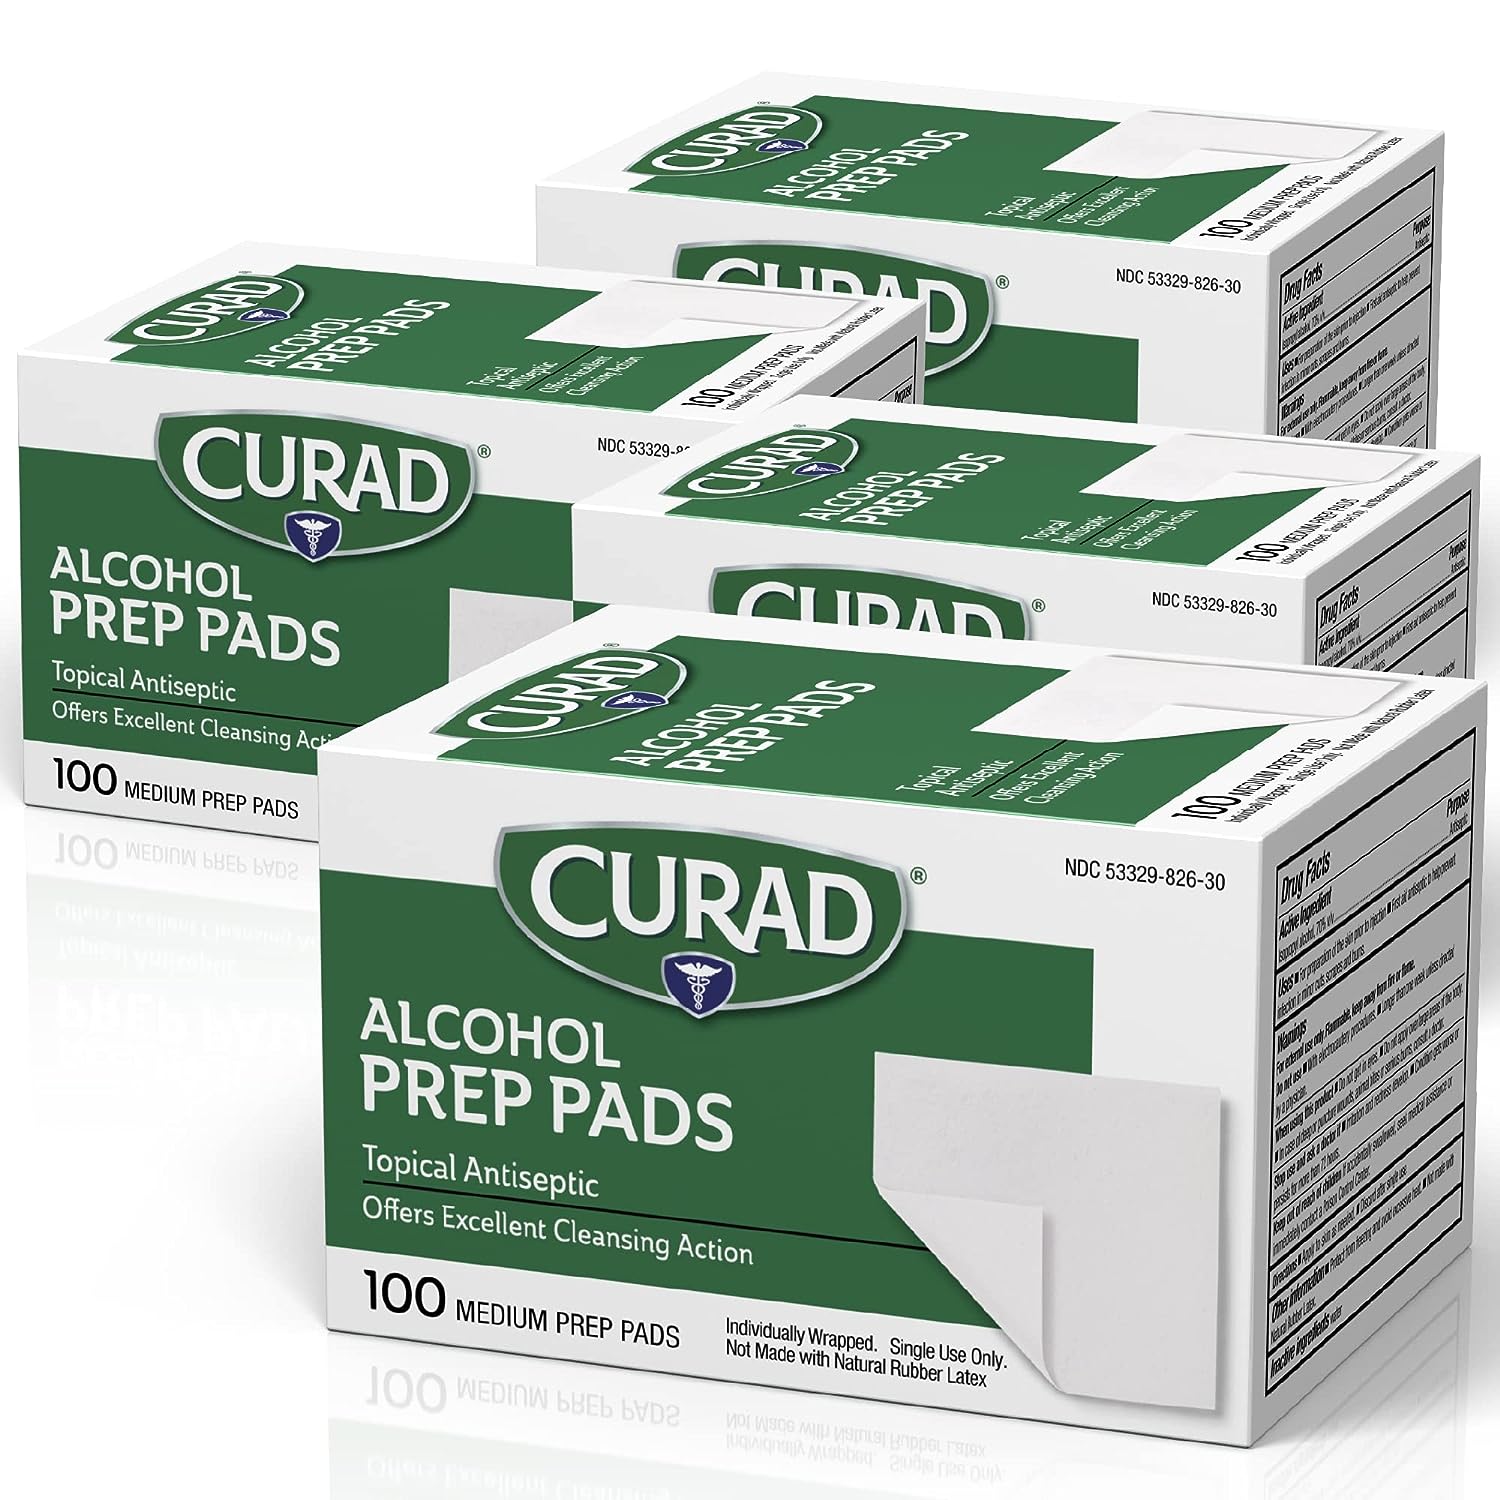 4-Pack 100-Count Curad Alcohol Prep Pads $4.49 + + Free Ship w/Prime or on orders $35+